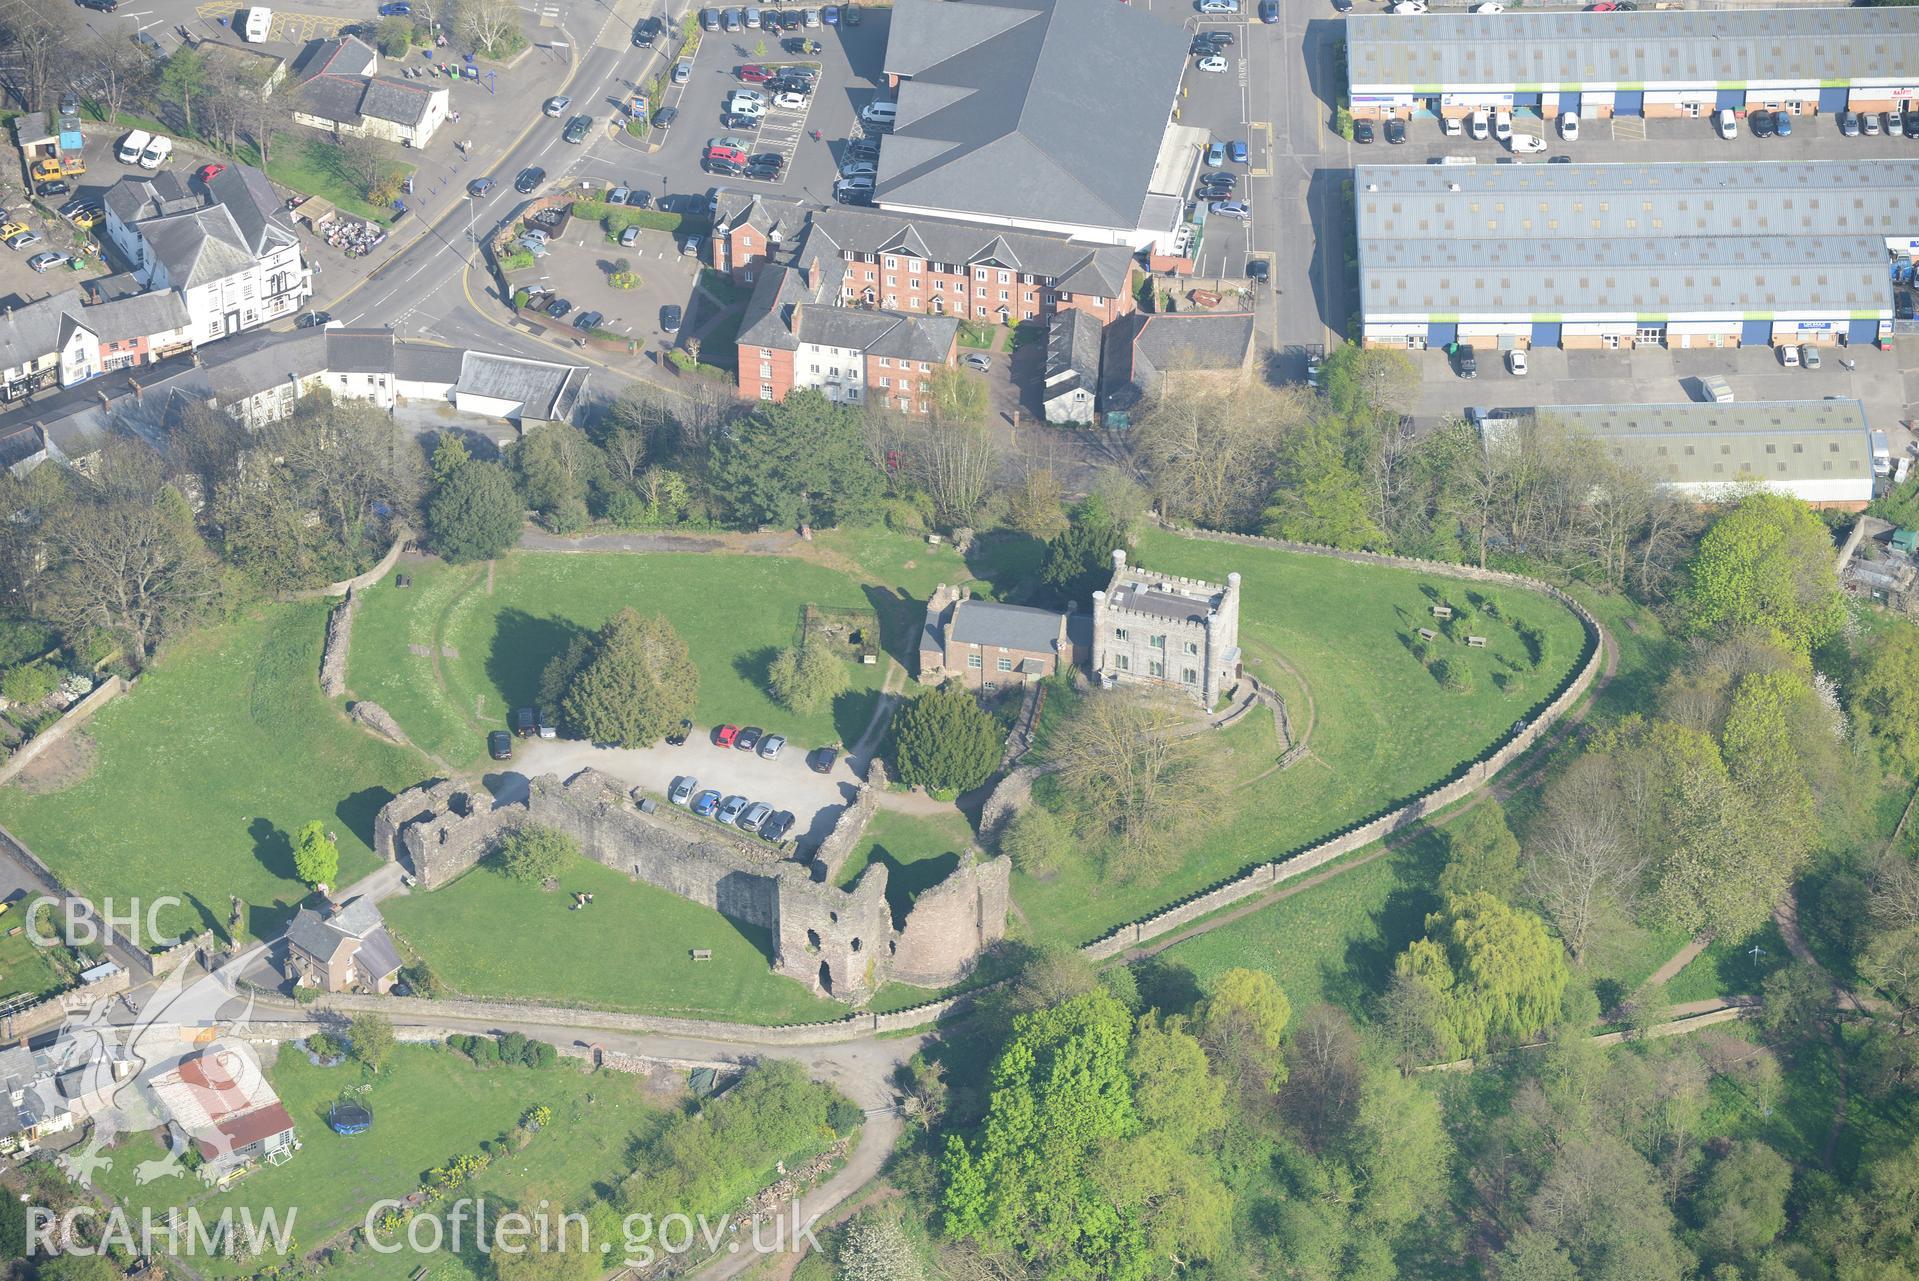 Abergavenny including the castle, castle garden and castle museum; corn mill; tannery and Lulworth House. Oblique aerial photograph taken during the Royal Commission's programme of archaeological aerial reconnaissance by Toby Driver on 21st April 2015.